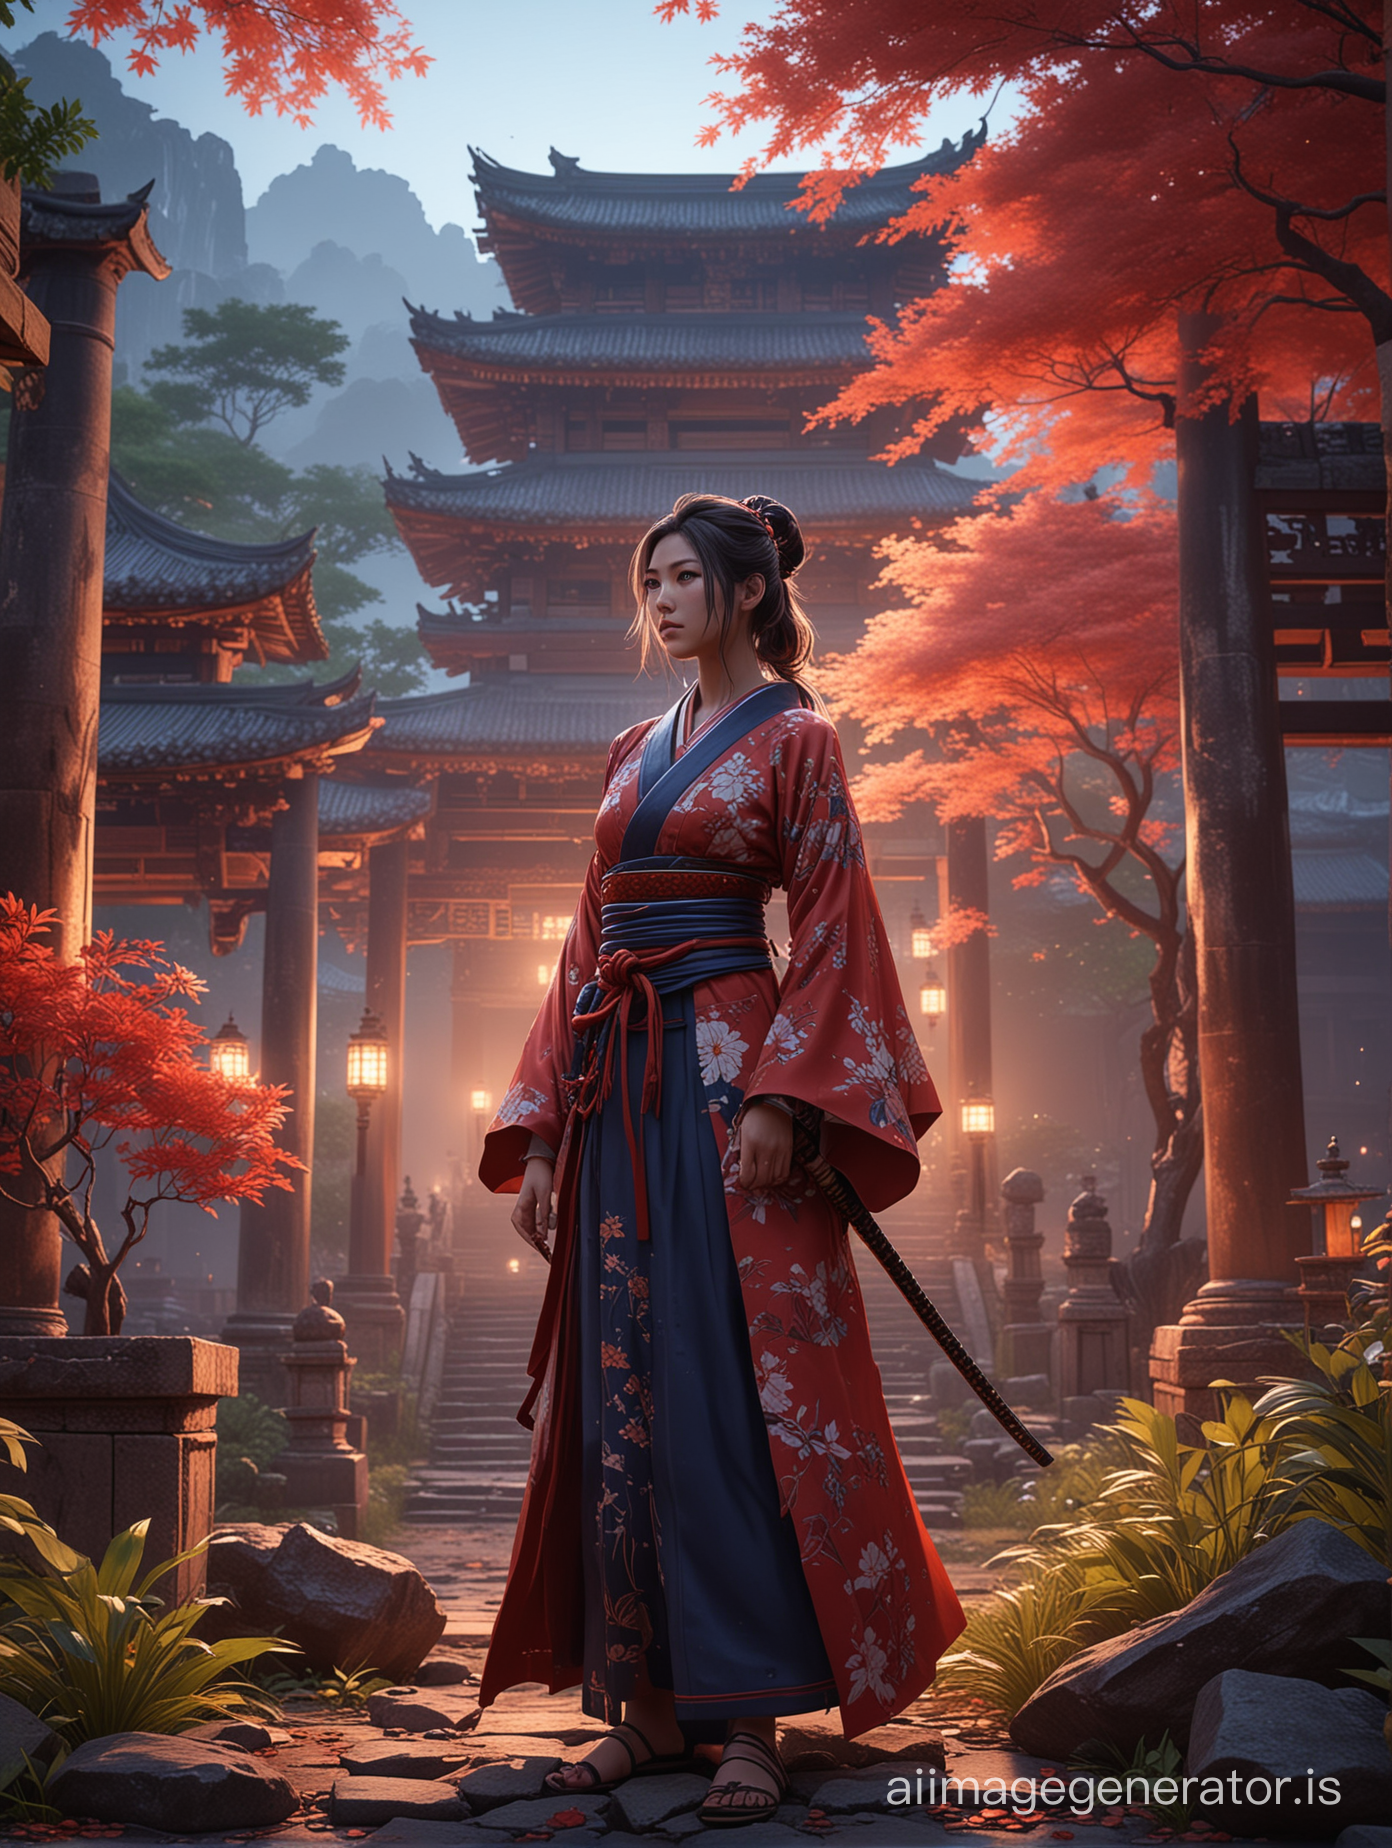 A digital art piece depicts an anime-style samurai woman in traditional attire, standing amidst vibrant foliage and ancient temple ruins at dusk. Rendered in the style of hyperdetailed and realistic rendering, with light red and indigo colors. Cultural themes from East Asia are depicted in the romantic scenery. The piece utilizes Unreal Engine 5 to create surreal dream-like scenes lit by studio lighting. I can't believe how beautiful the digital artwork is